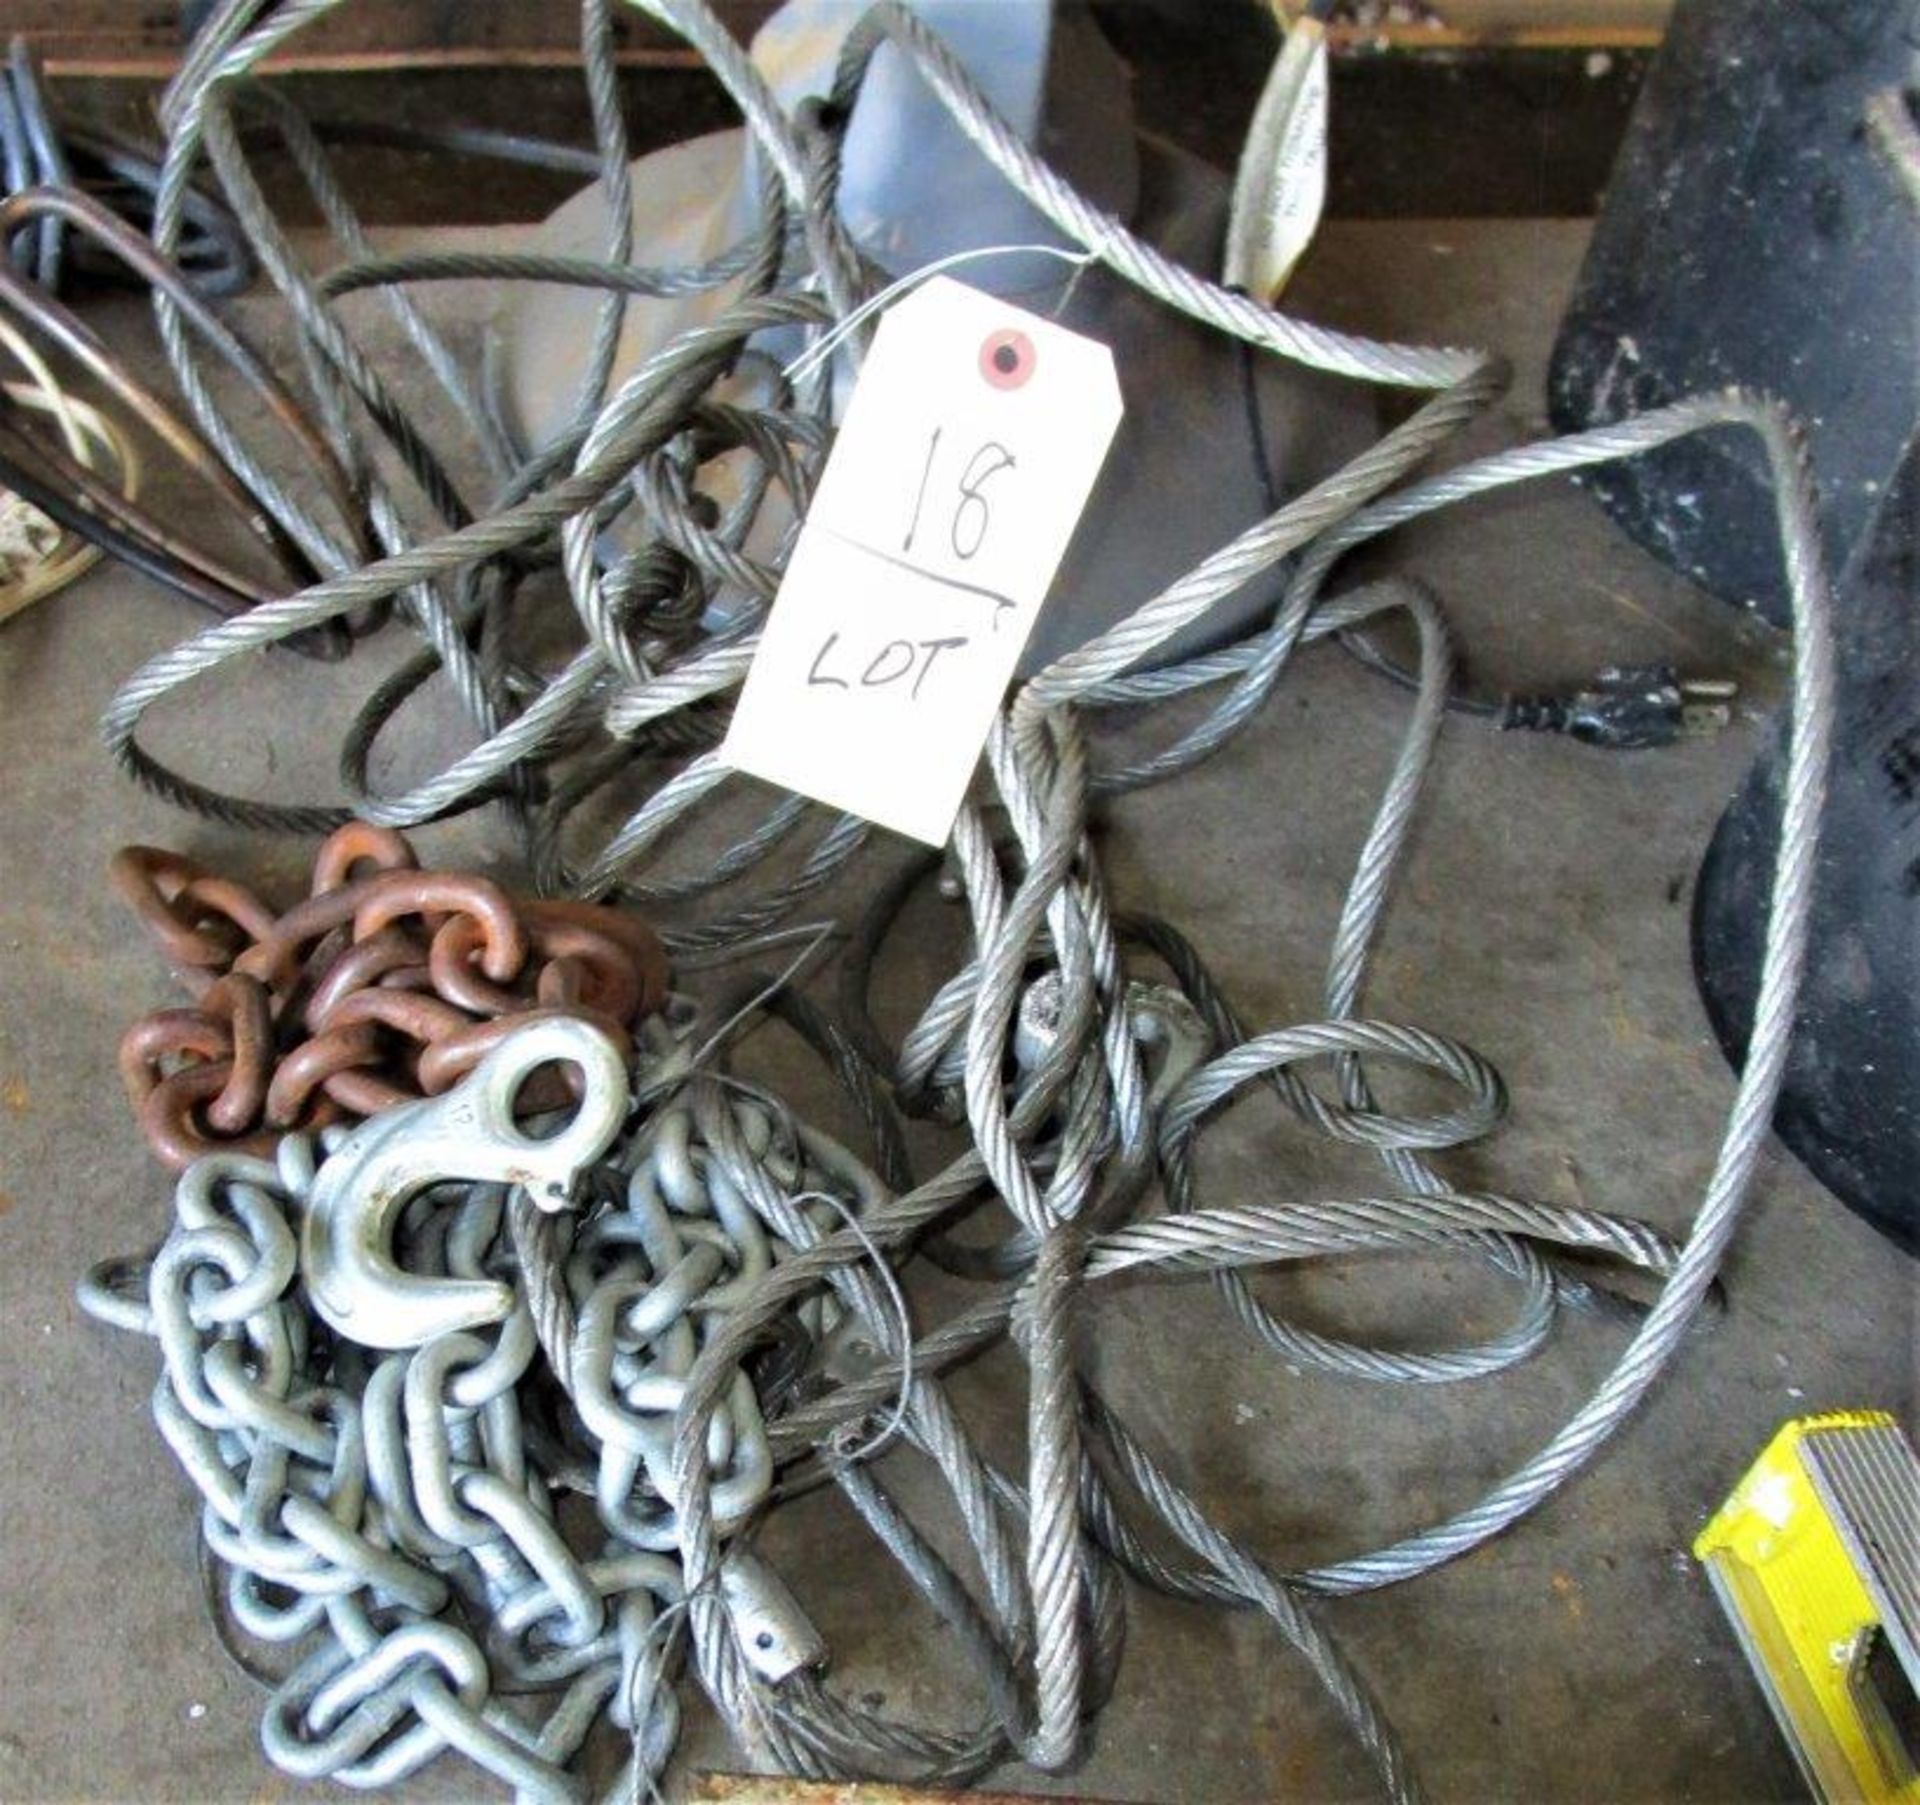 TOWING CABLE & CHAINS